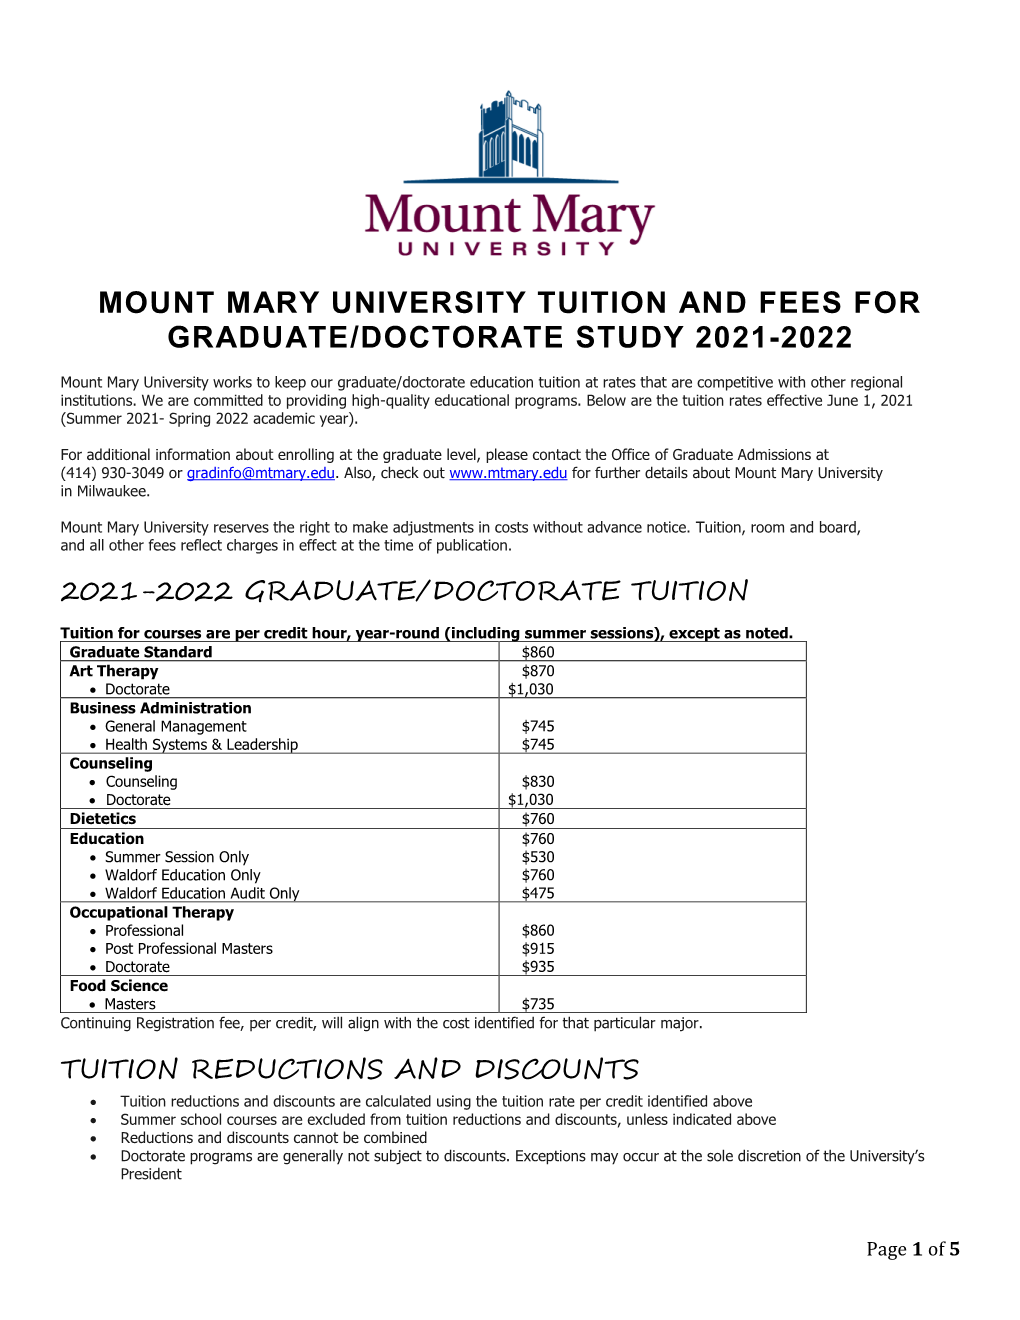 Mount Mary University Tuition and Fees for Graduate/Doctorate Study 2021-2022